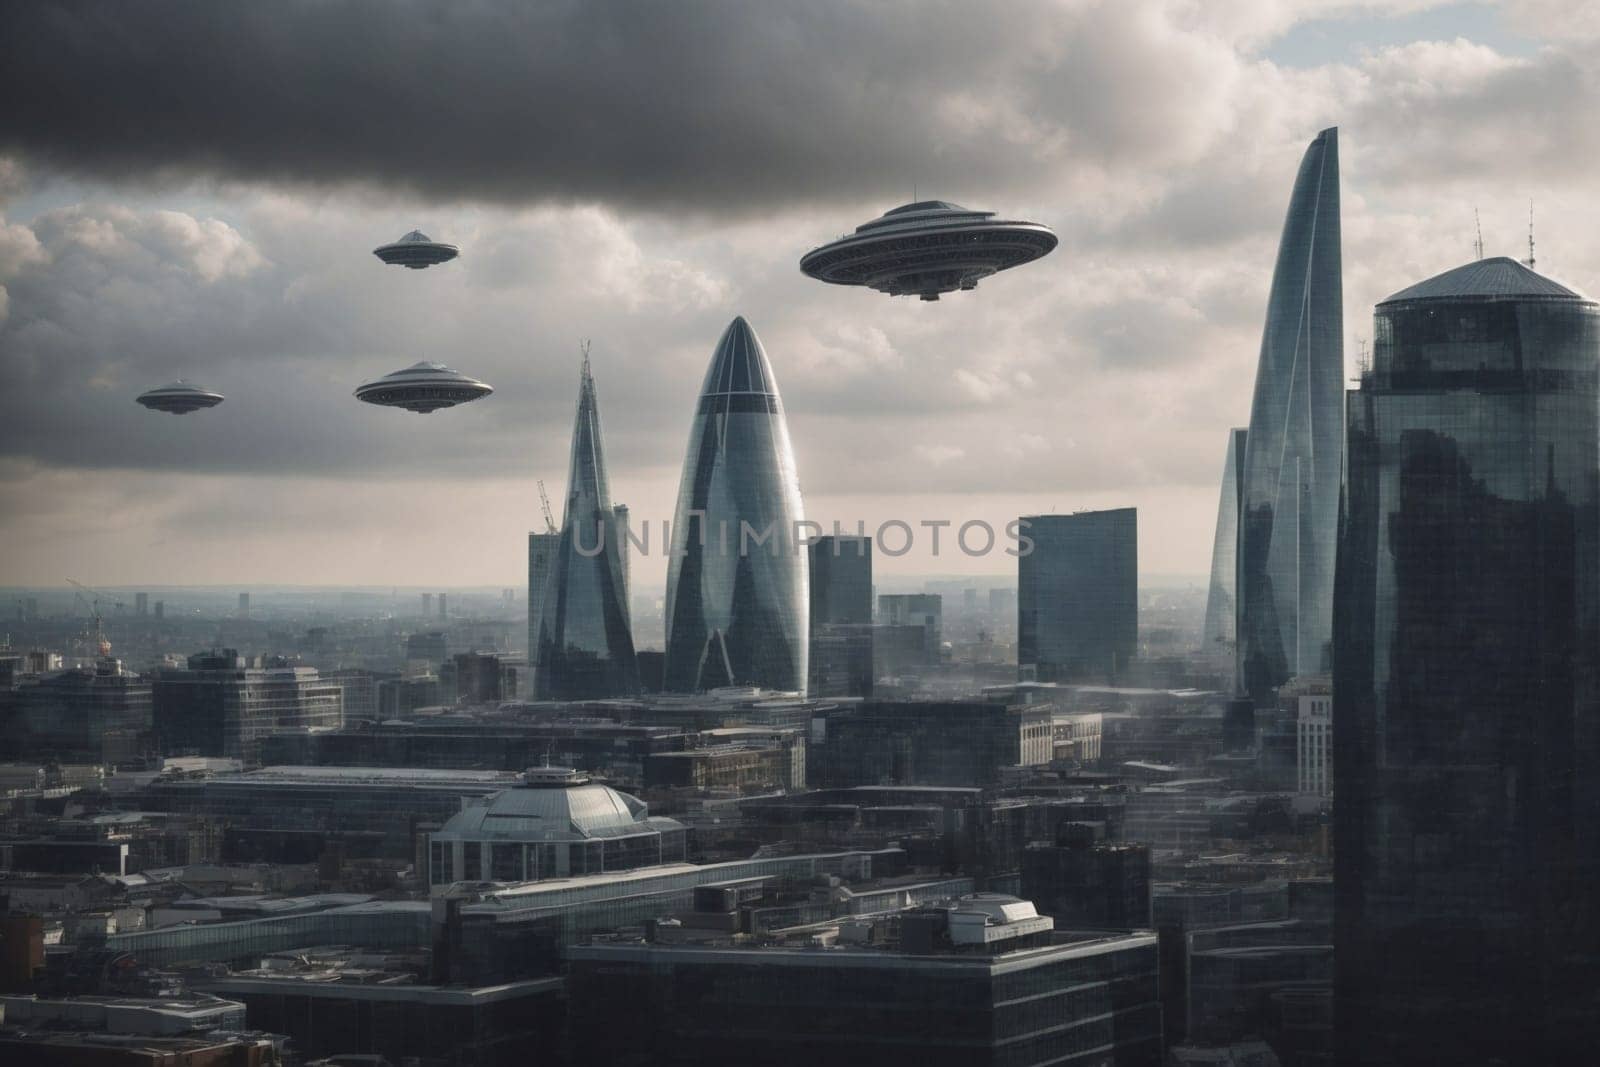 Multiple unidentified flying objects resembling saucers floating in the air over a bustling urban city.